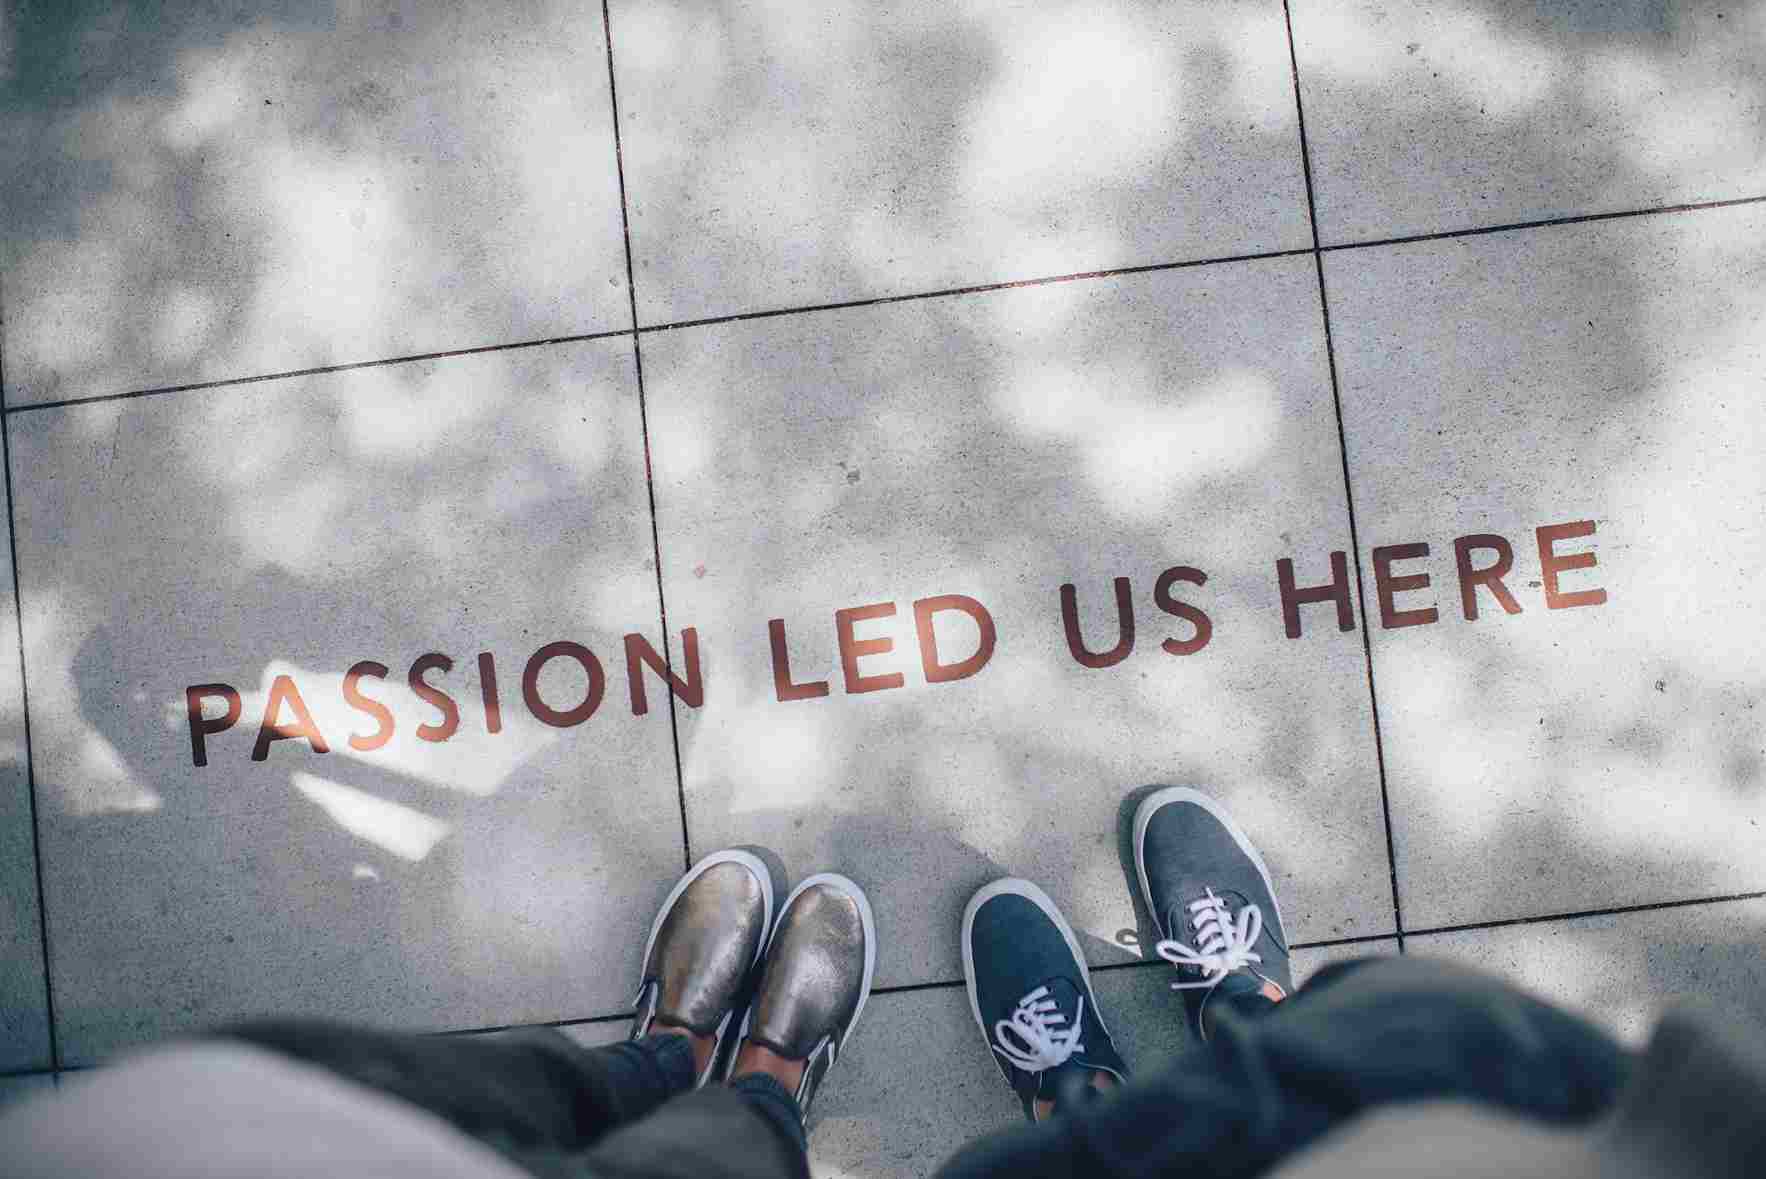 Writing on tiles saying "passion led us here", a visualisation of employer branding - a key concept in talent attraction